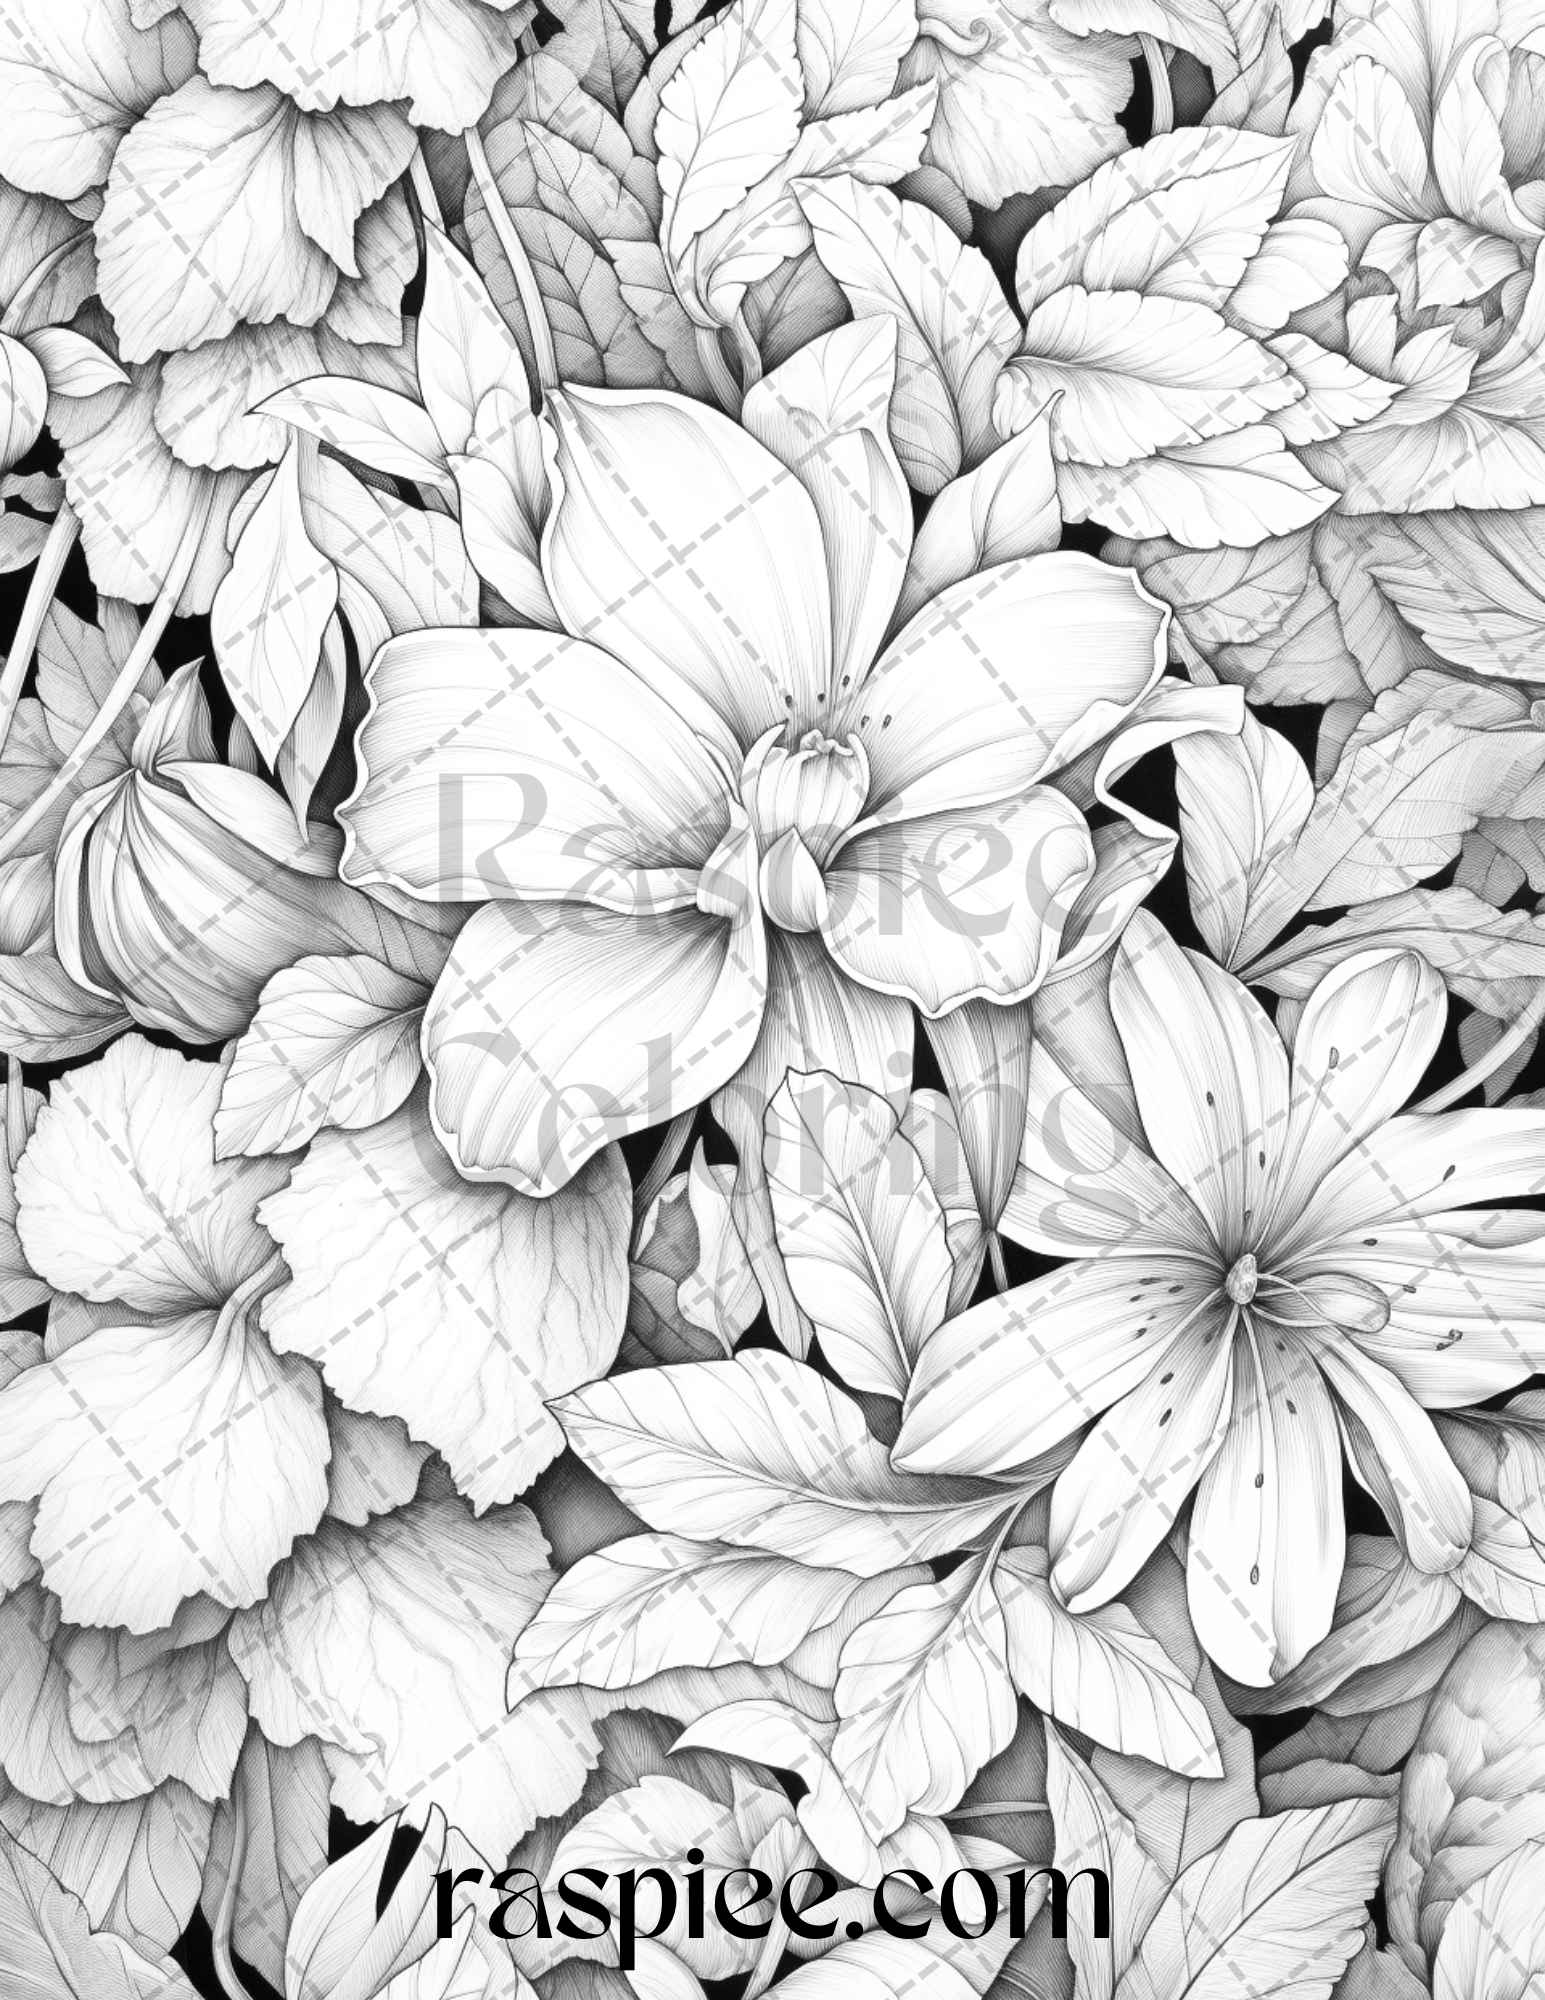 50 Vintage Floral Patterns Grayscale Coloring Pages Printable for Adults, PDF File Instant Download - raspiee